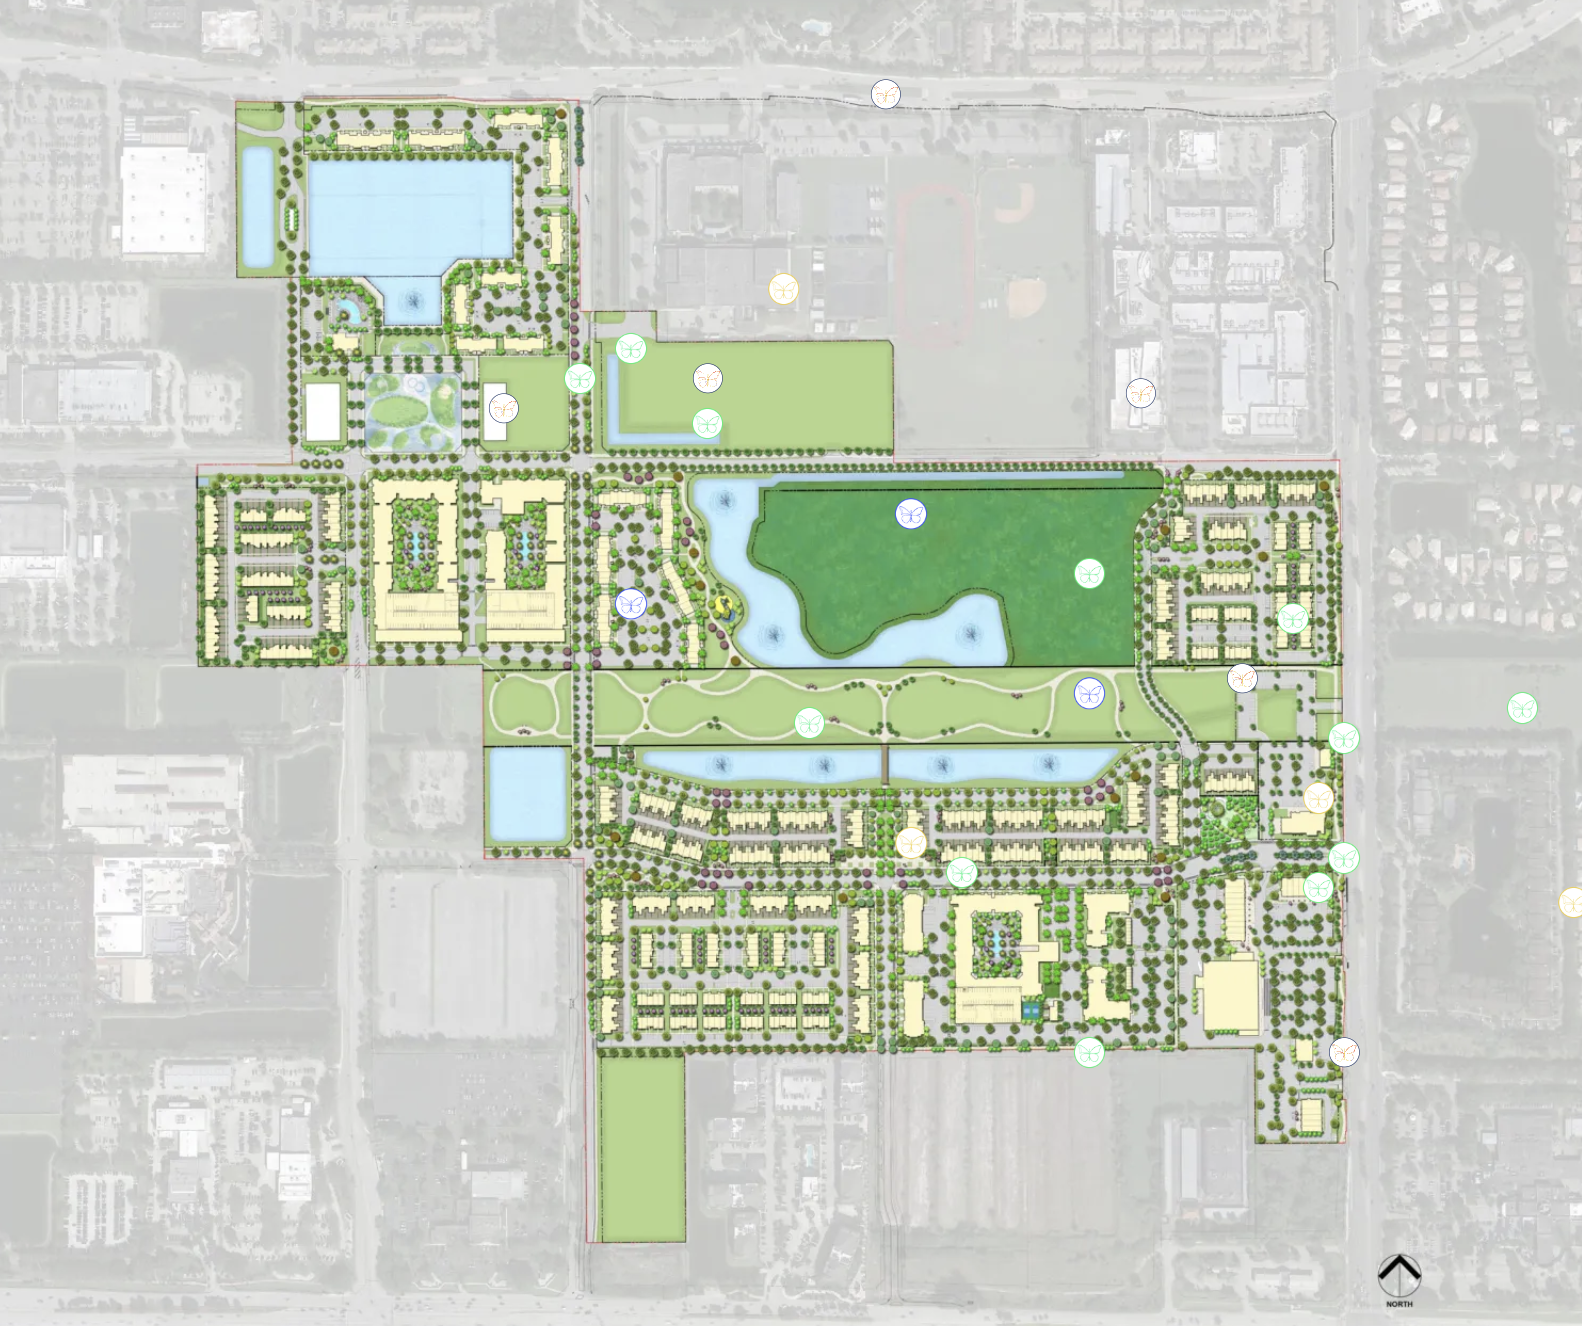 Coconut Creek's MainStreet Project Promises New Downtown with Green Spaces and Upscale Living 1